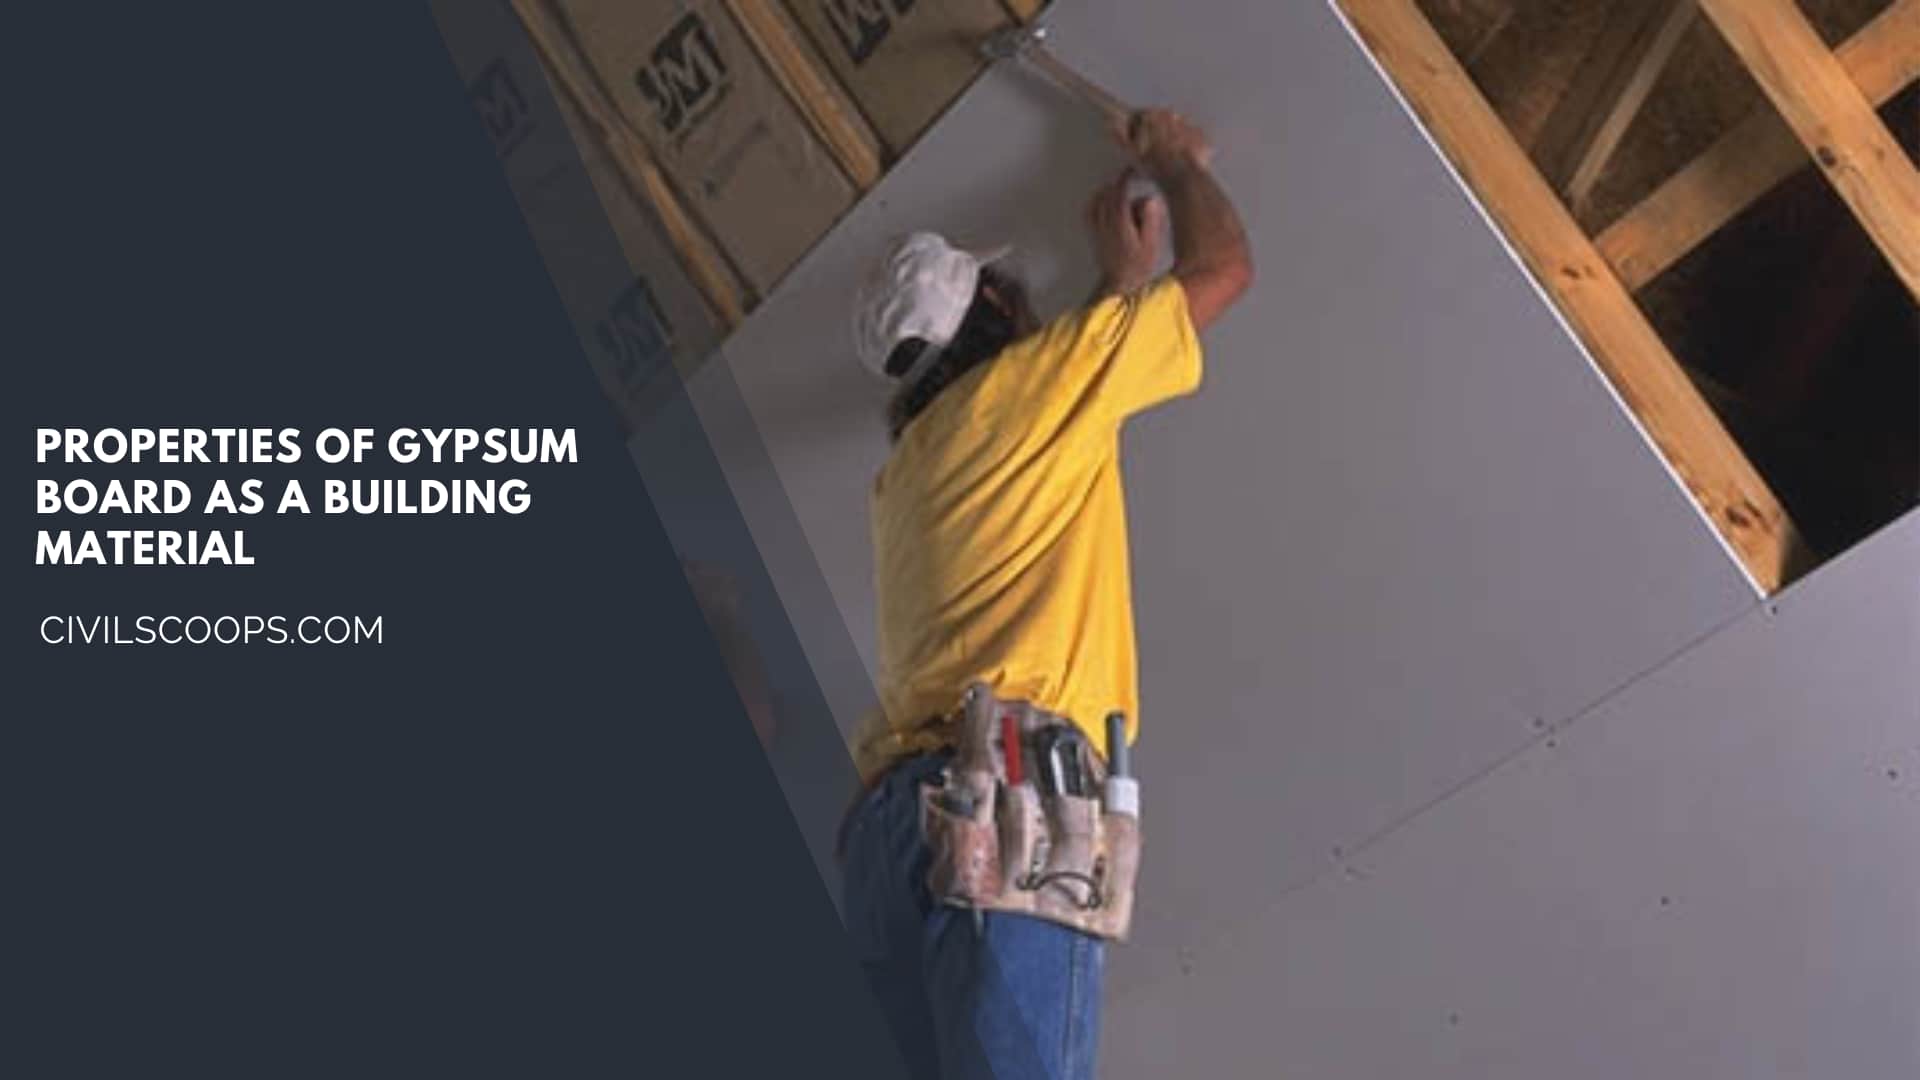 Properties of Gypsum Board as a Building Material